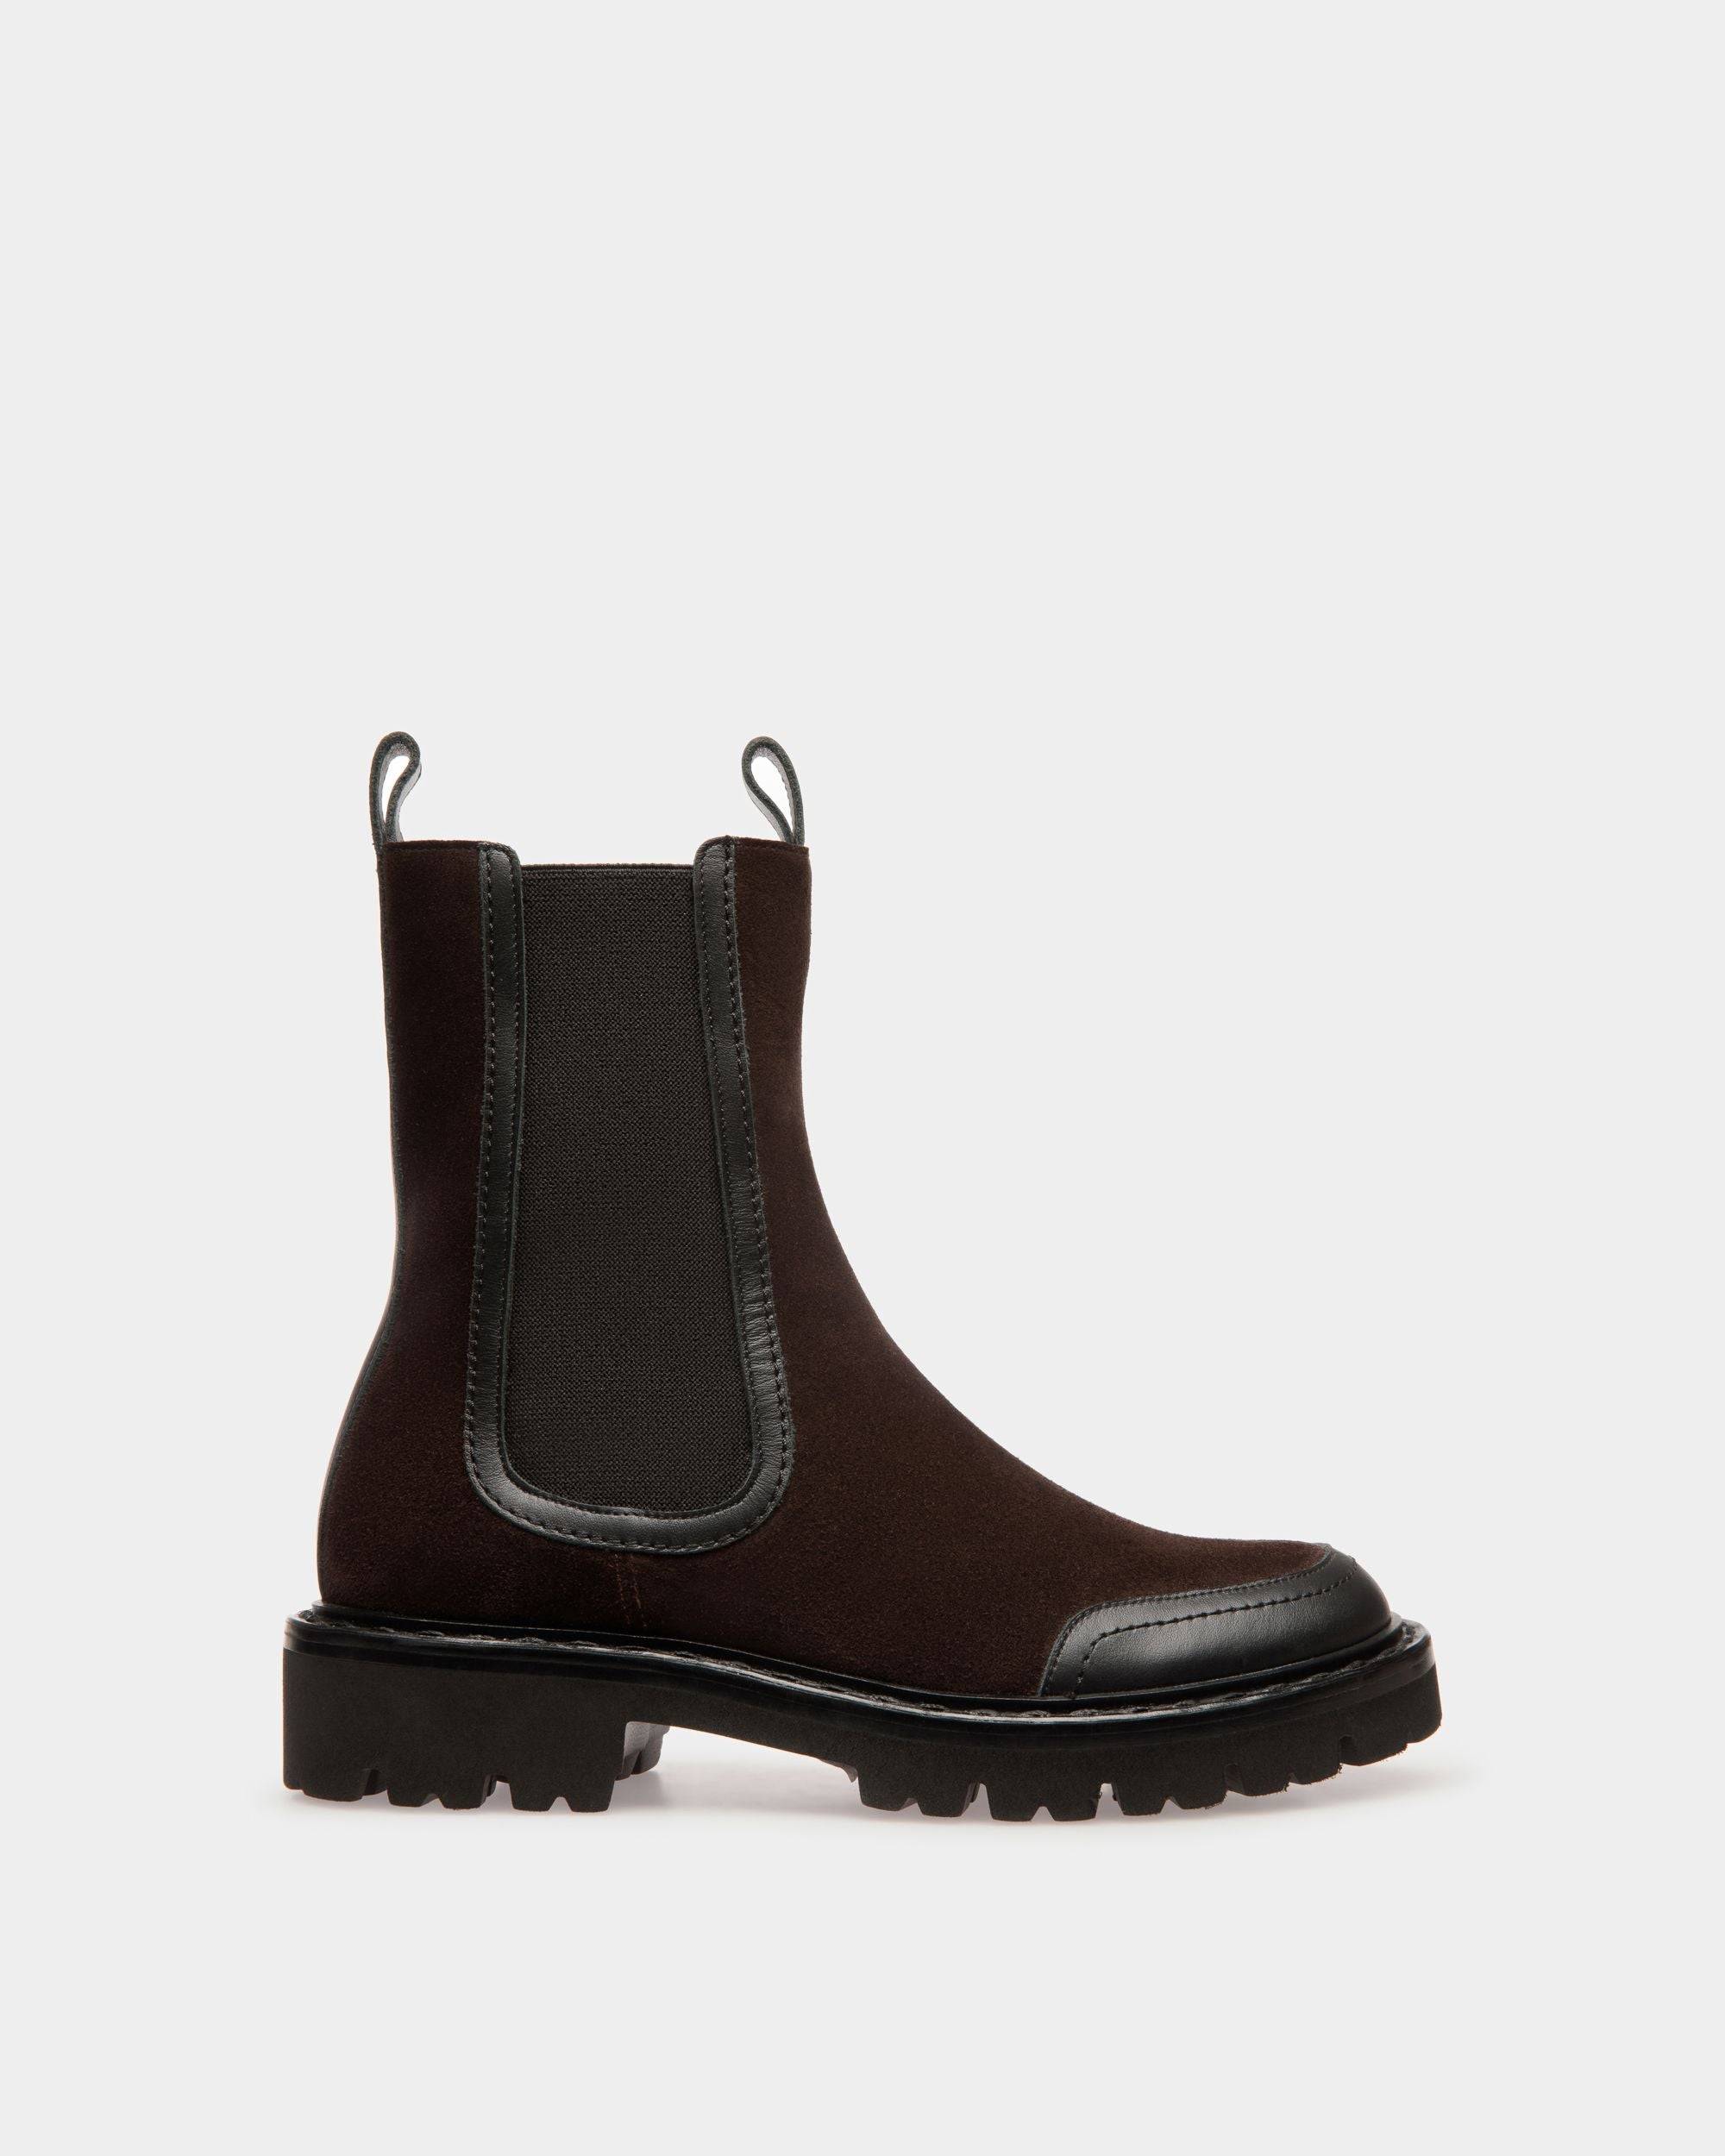 Nalyna | Women's Boots | Brown Leather | Bally | Still Life Side